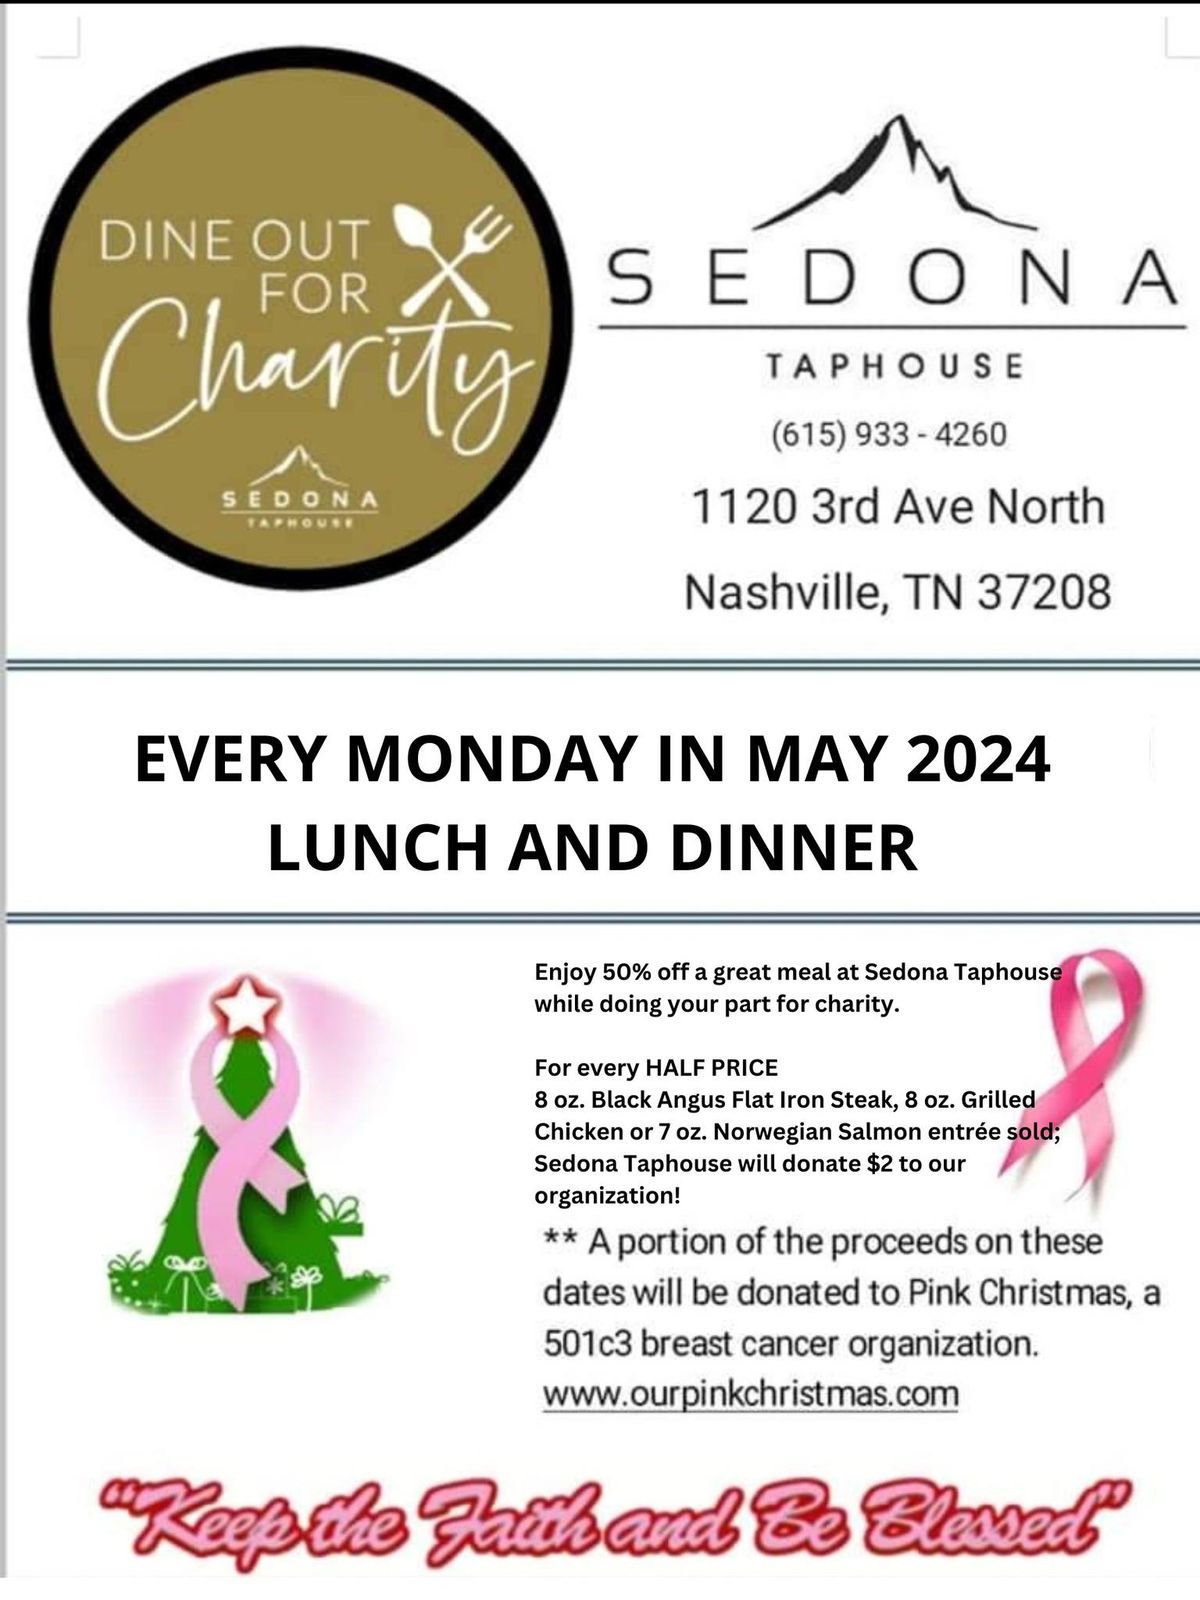 Sedona Taphouse - Dine Out for Charity